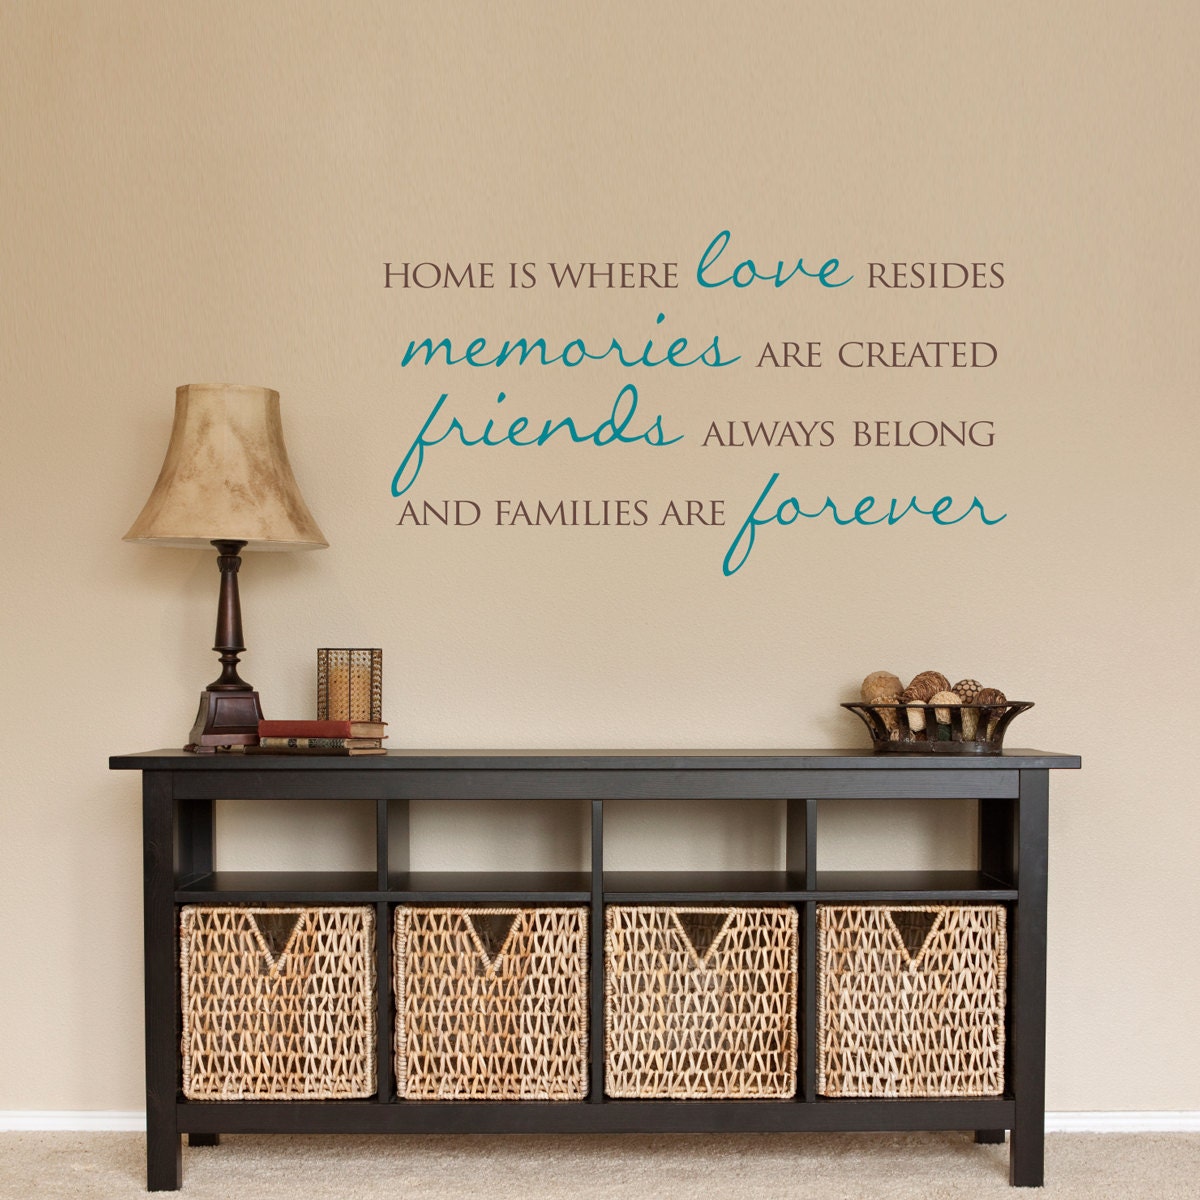 Home Wall Decal | Home is where love resides | Families are forever | Quote Vinyl Sticker